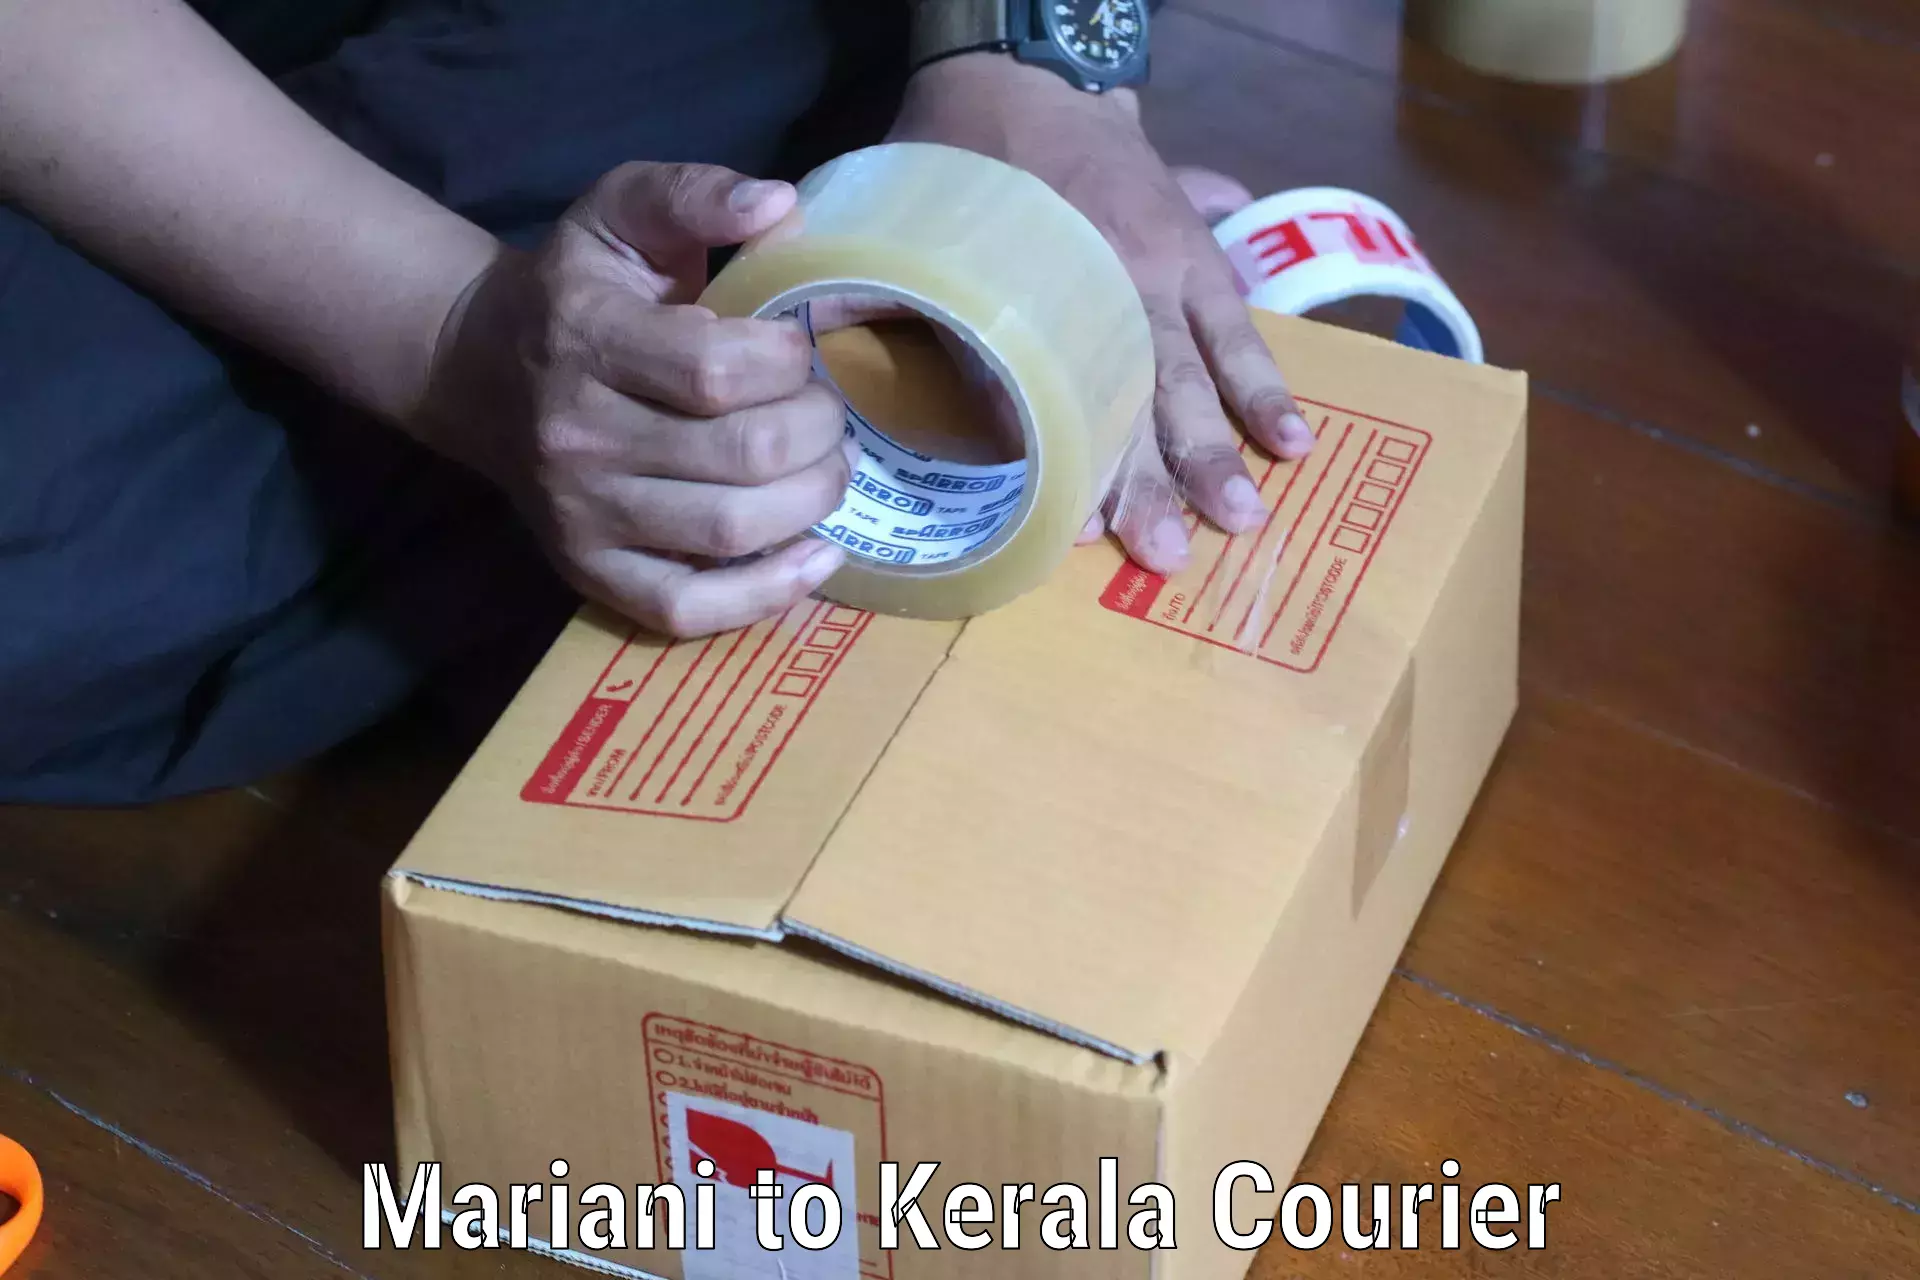 Reliable delivery network Mariani to Kerala